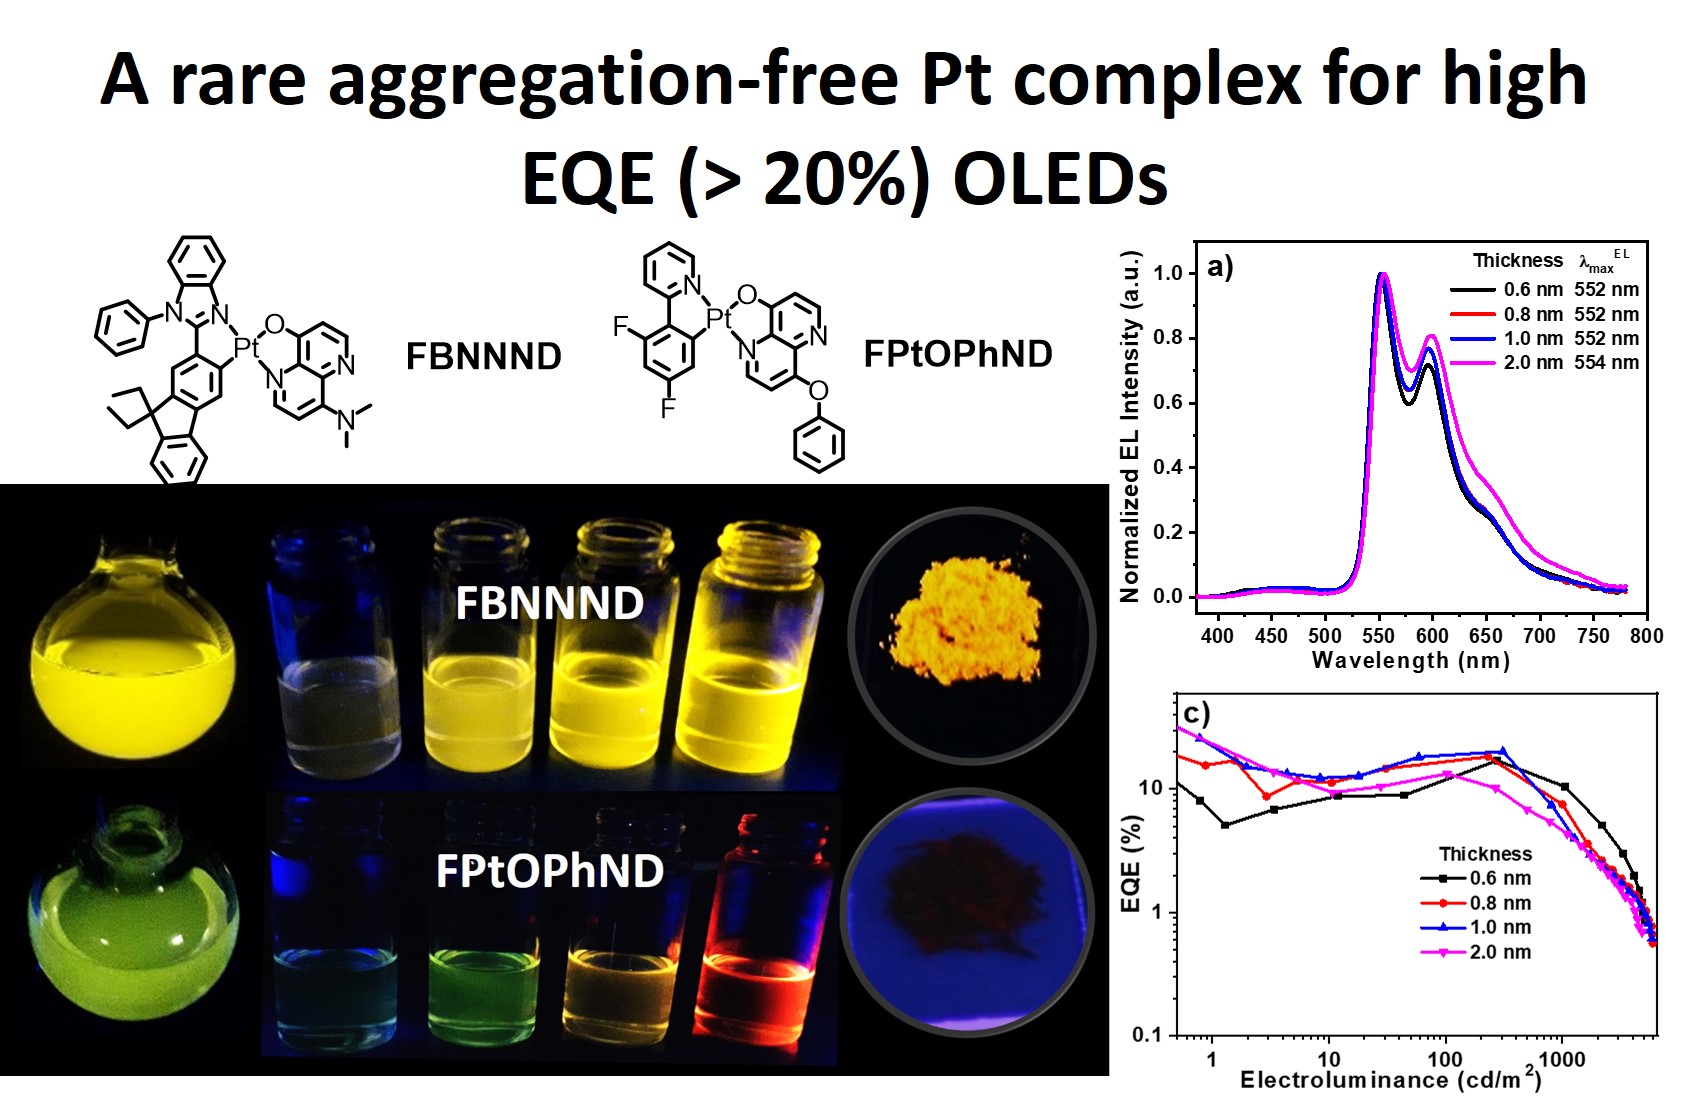 A rare aggregation-free Pt complex for high EQE (> 20%) OLEDs 